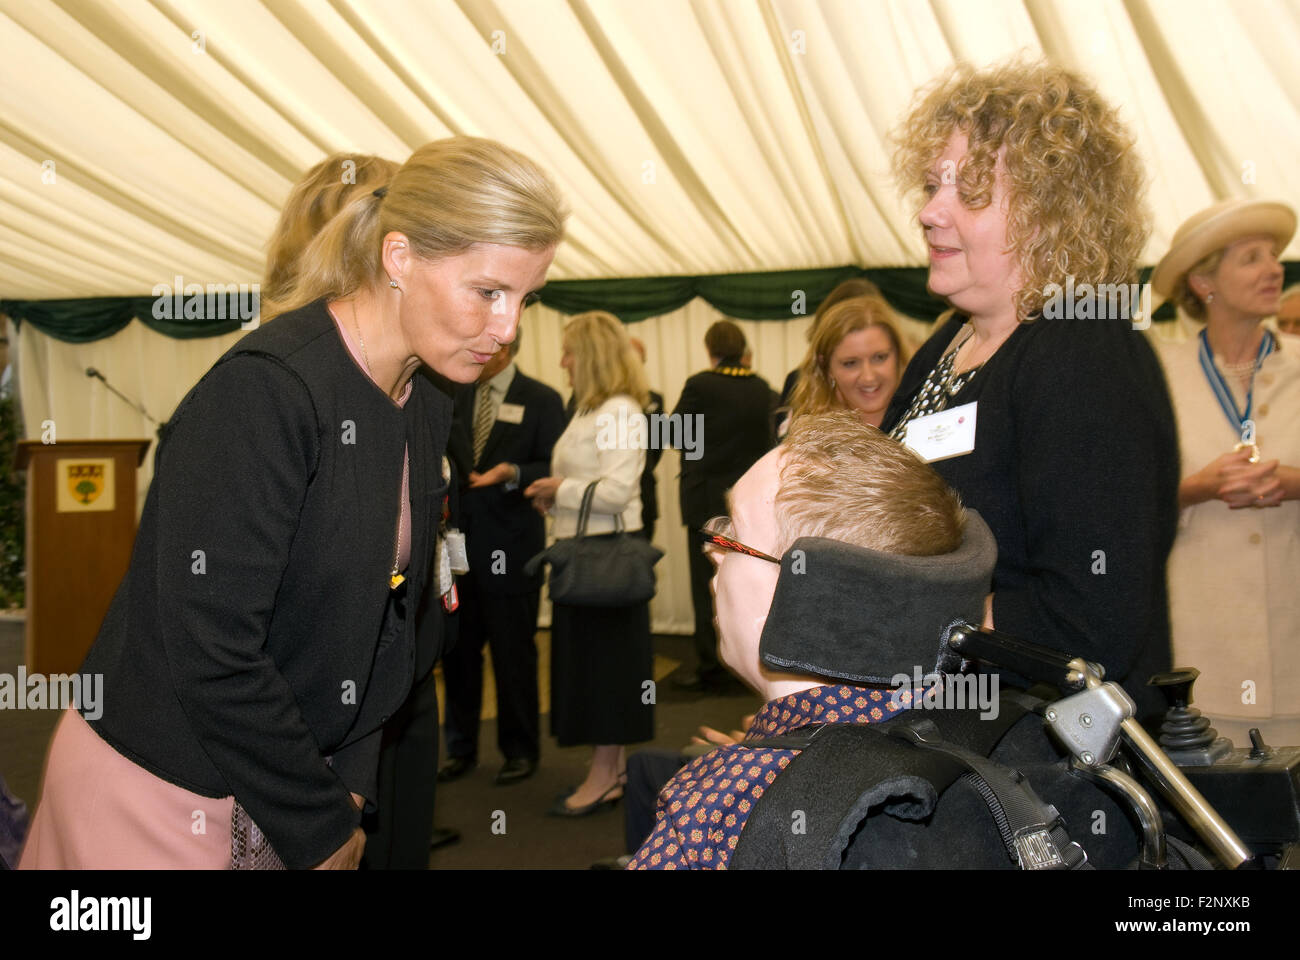 her-royal-highness-the-countess-of-wessex-meeting-a-student-during-F2NXKB.jpg